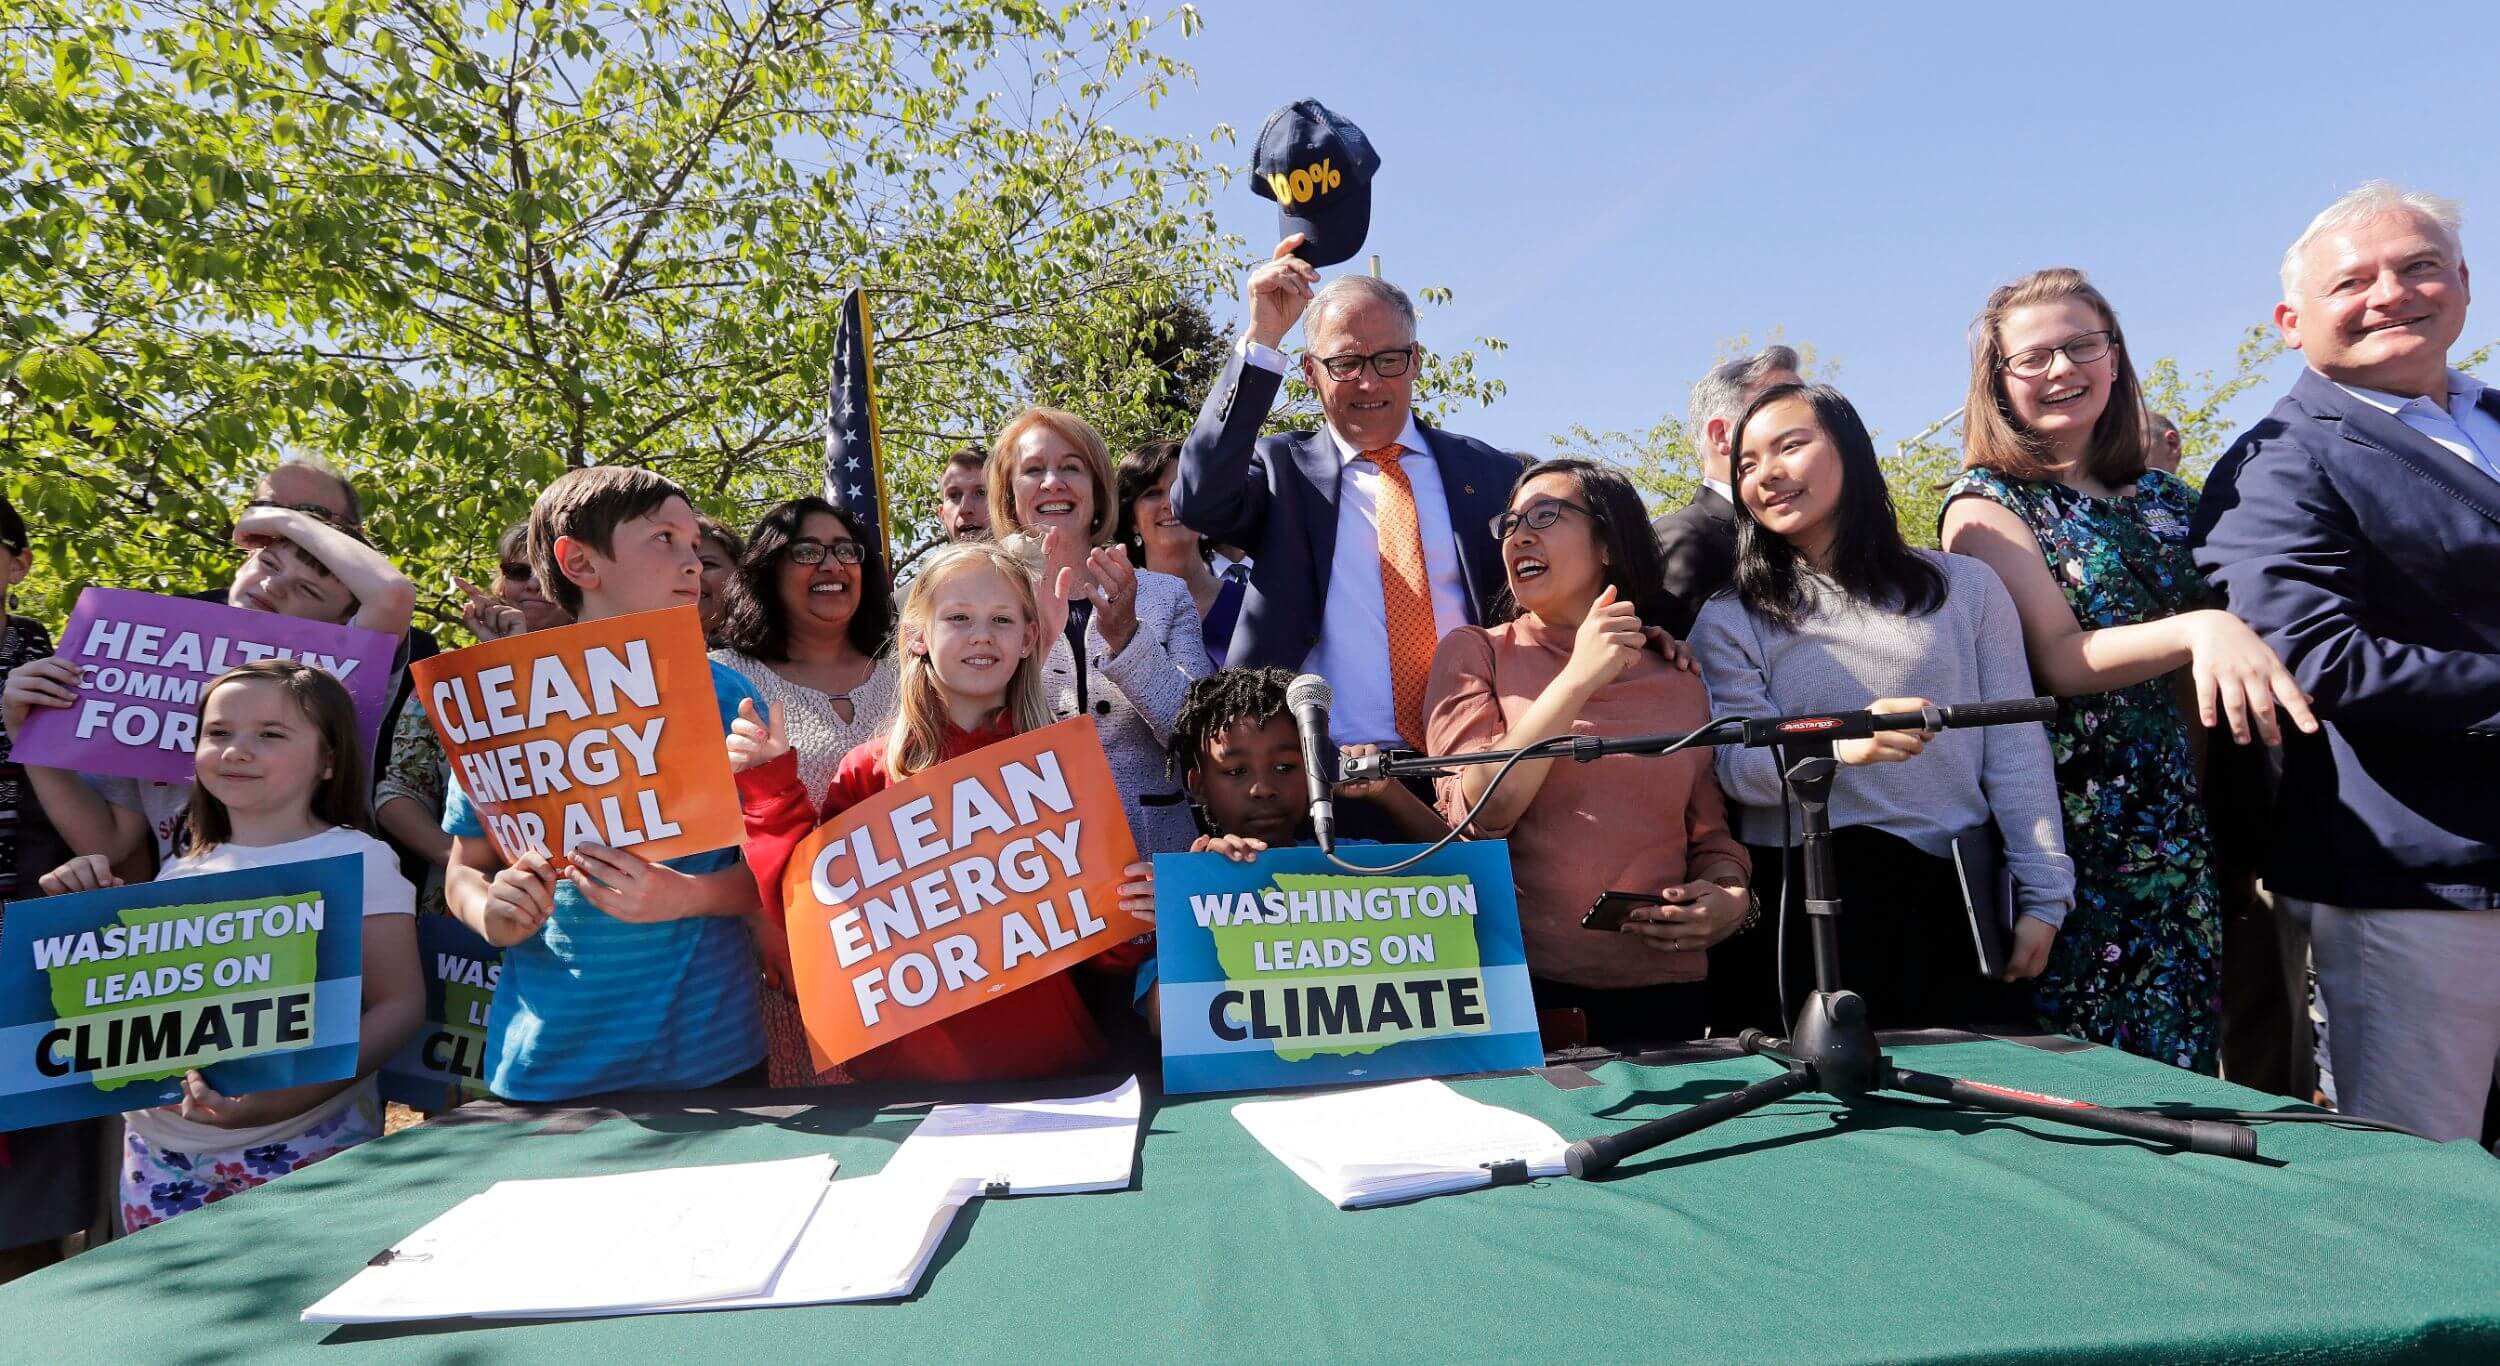 A cluster of children and adults surround a table with a microphone, outdoors. Some hold signs that say "Clean Energy for All" and "Washington Leads on Climate Change." In the center, an older man in a suit holds up a baseball cap.